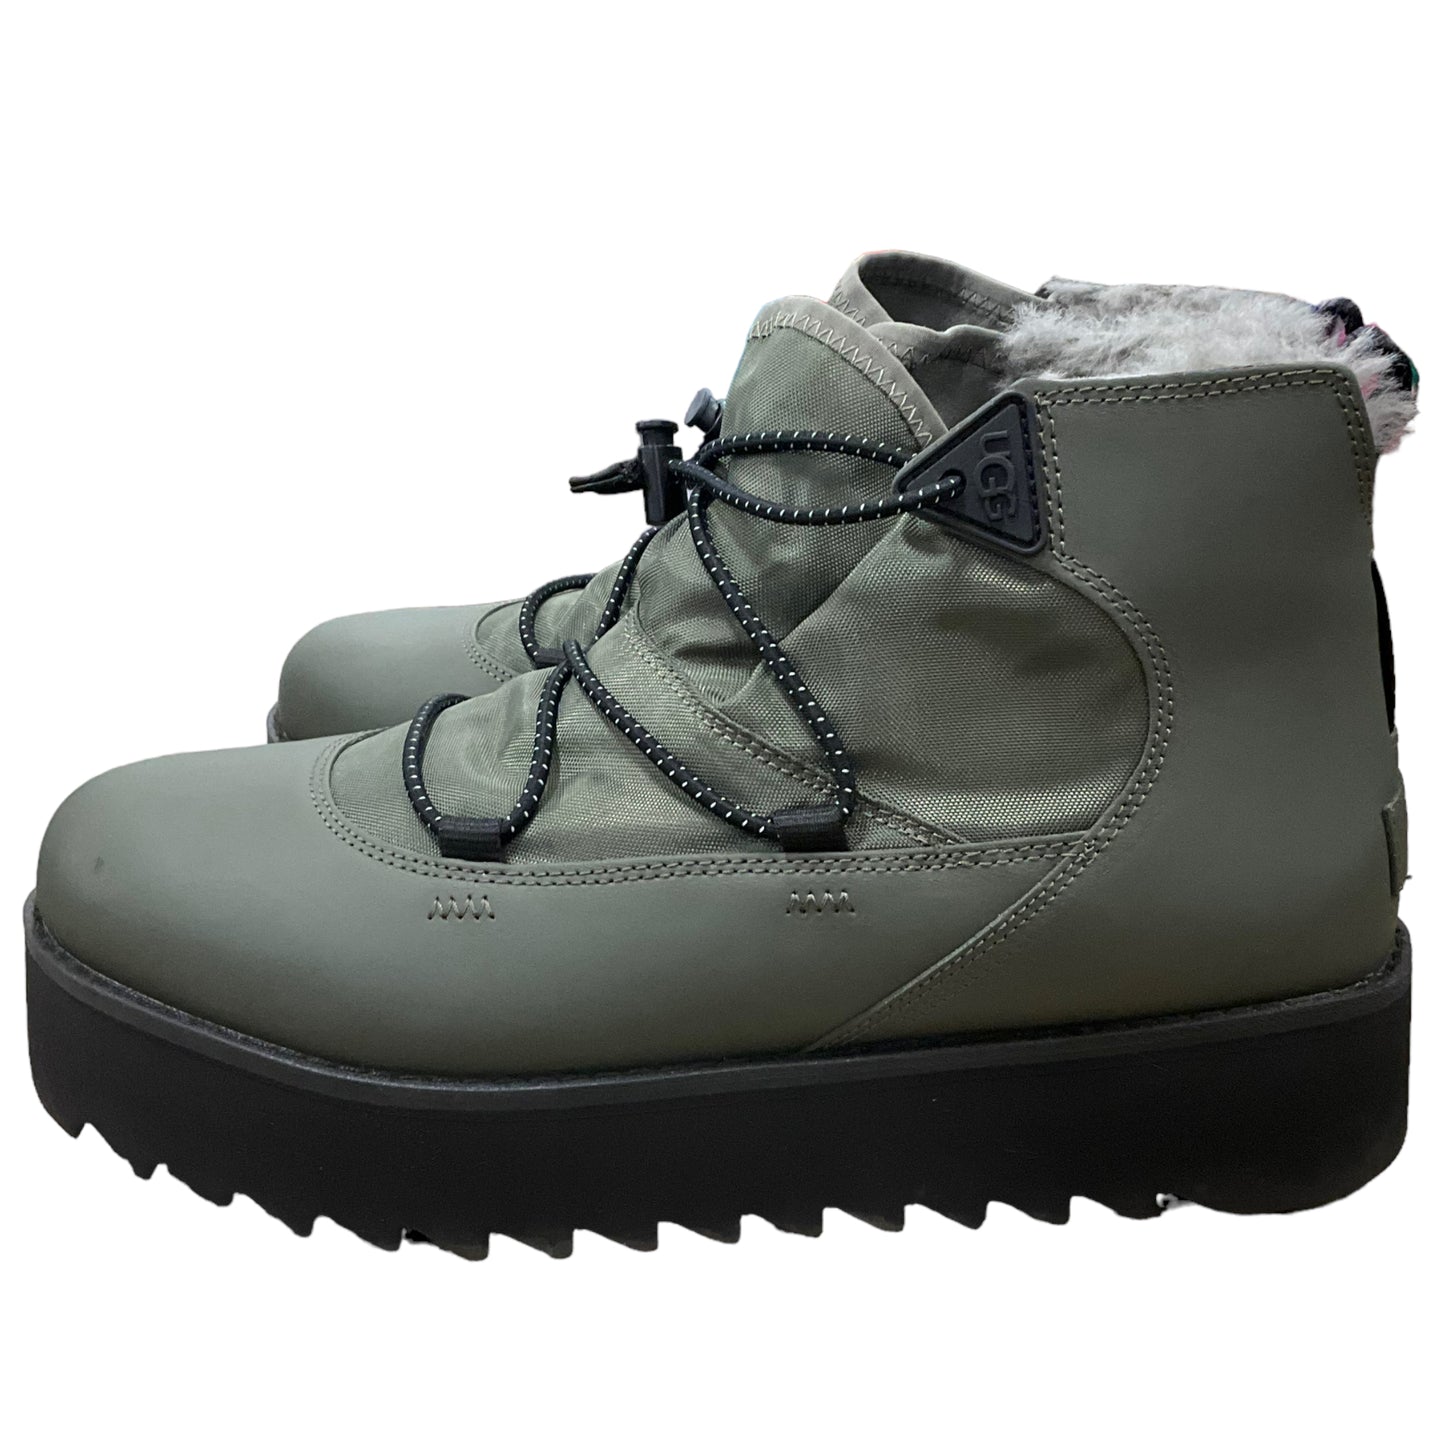 Boots Snow By Ugg  Size: 10